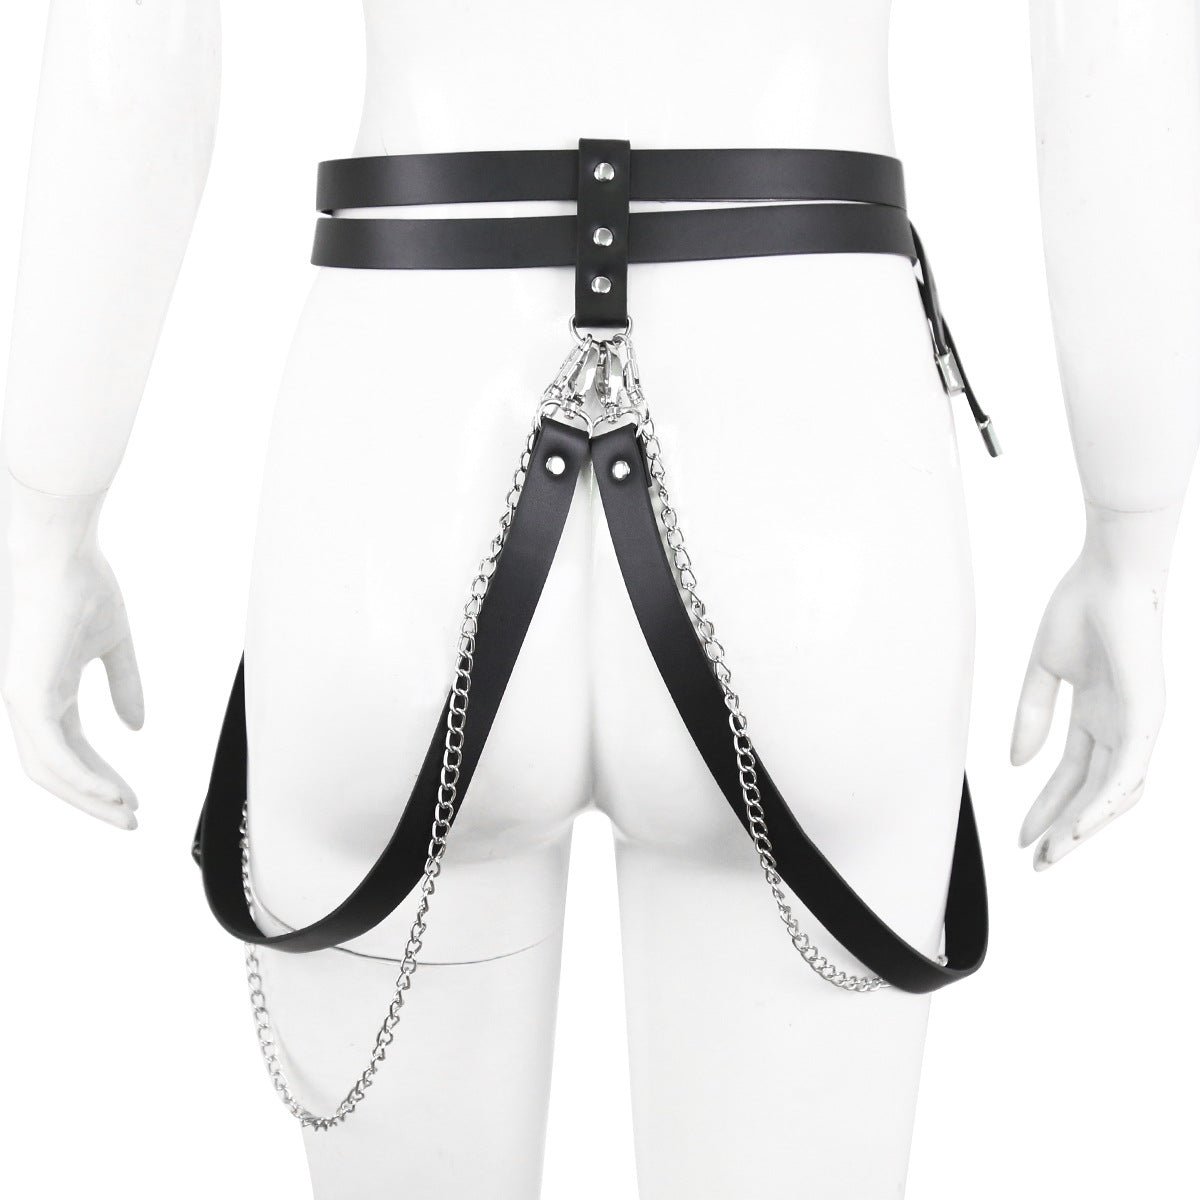 Waist and Buttock Harness